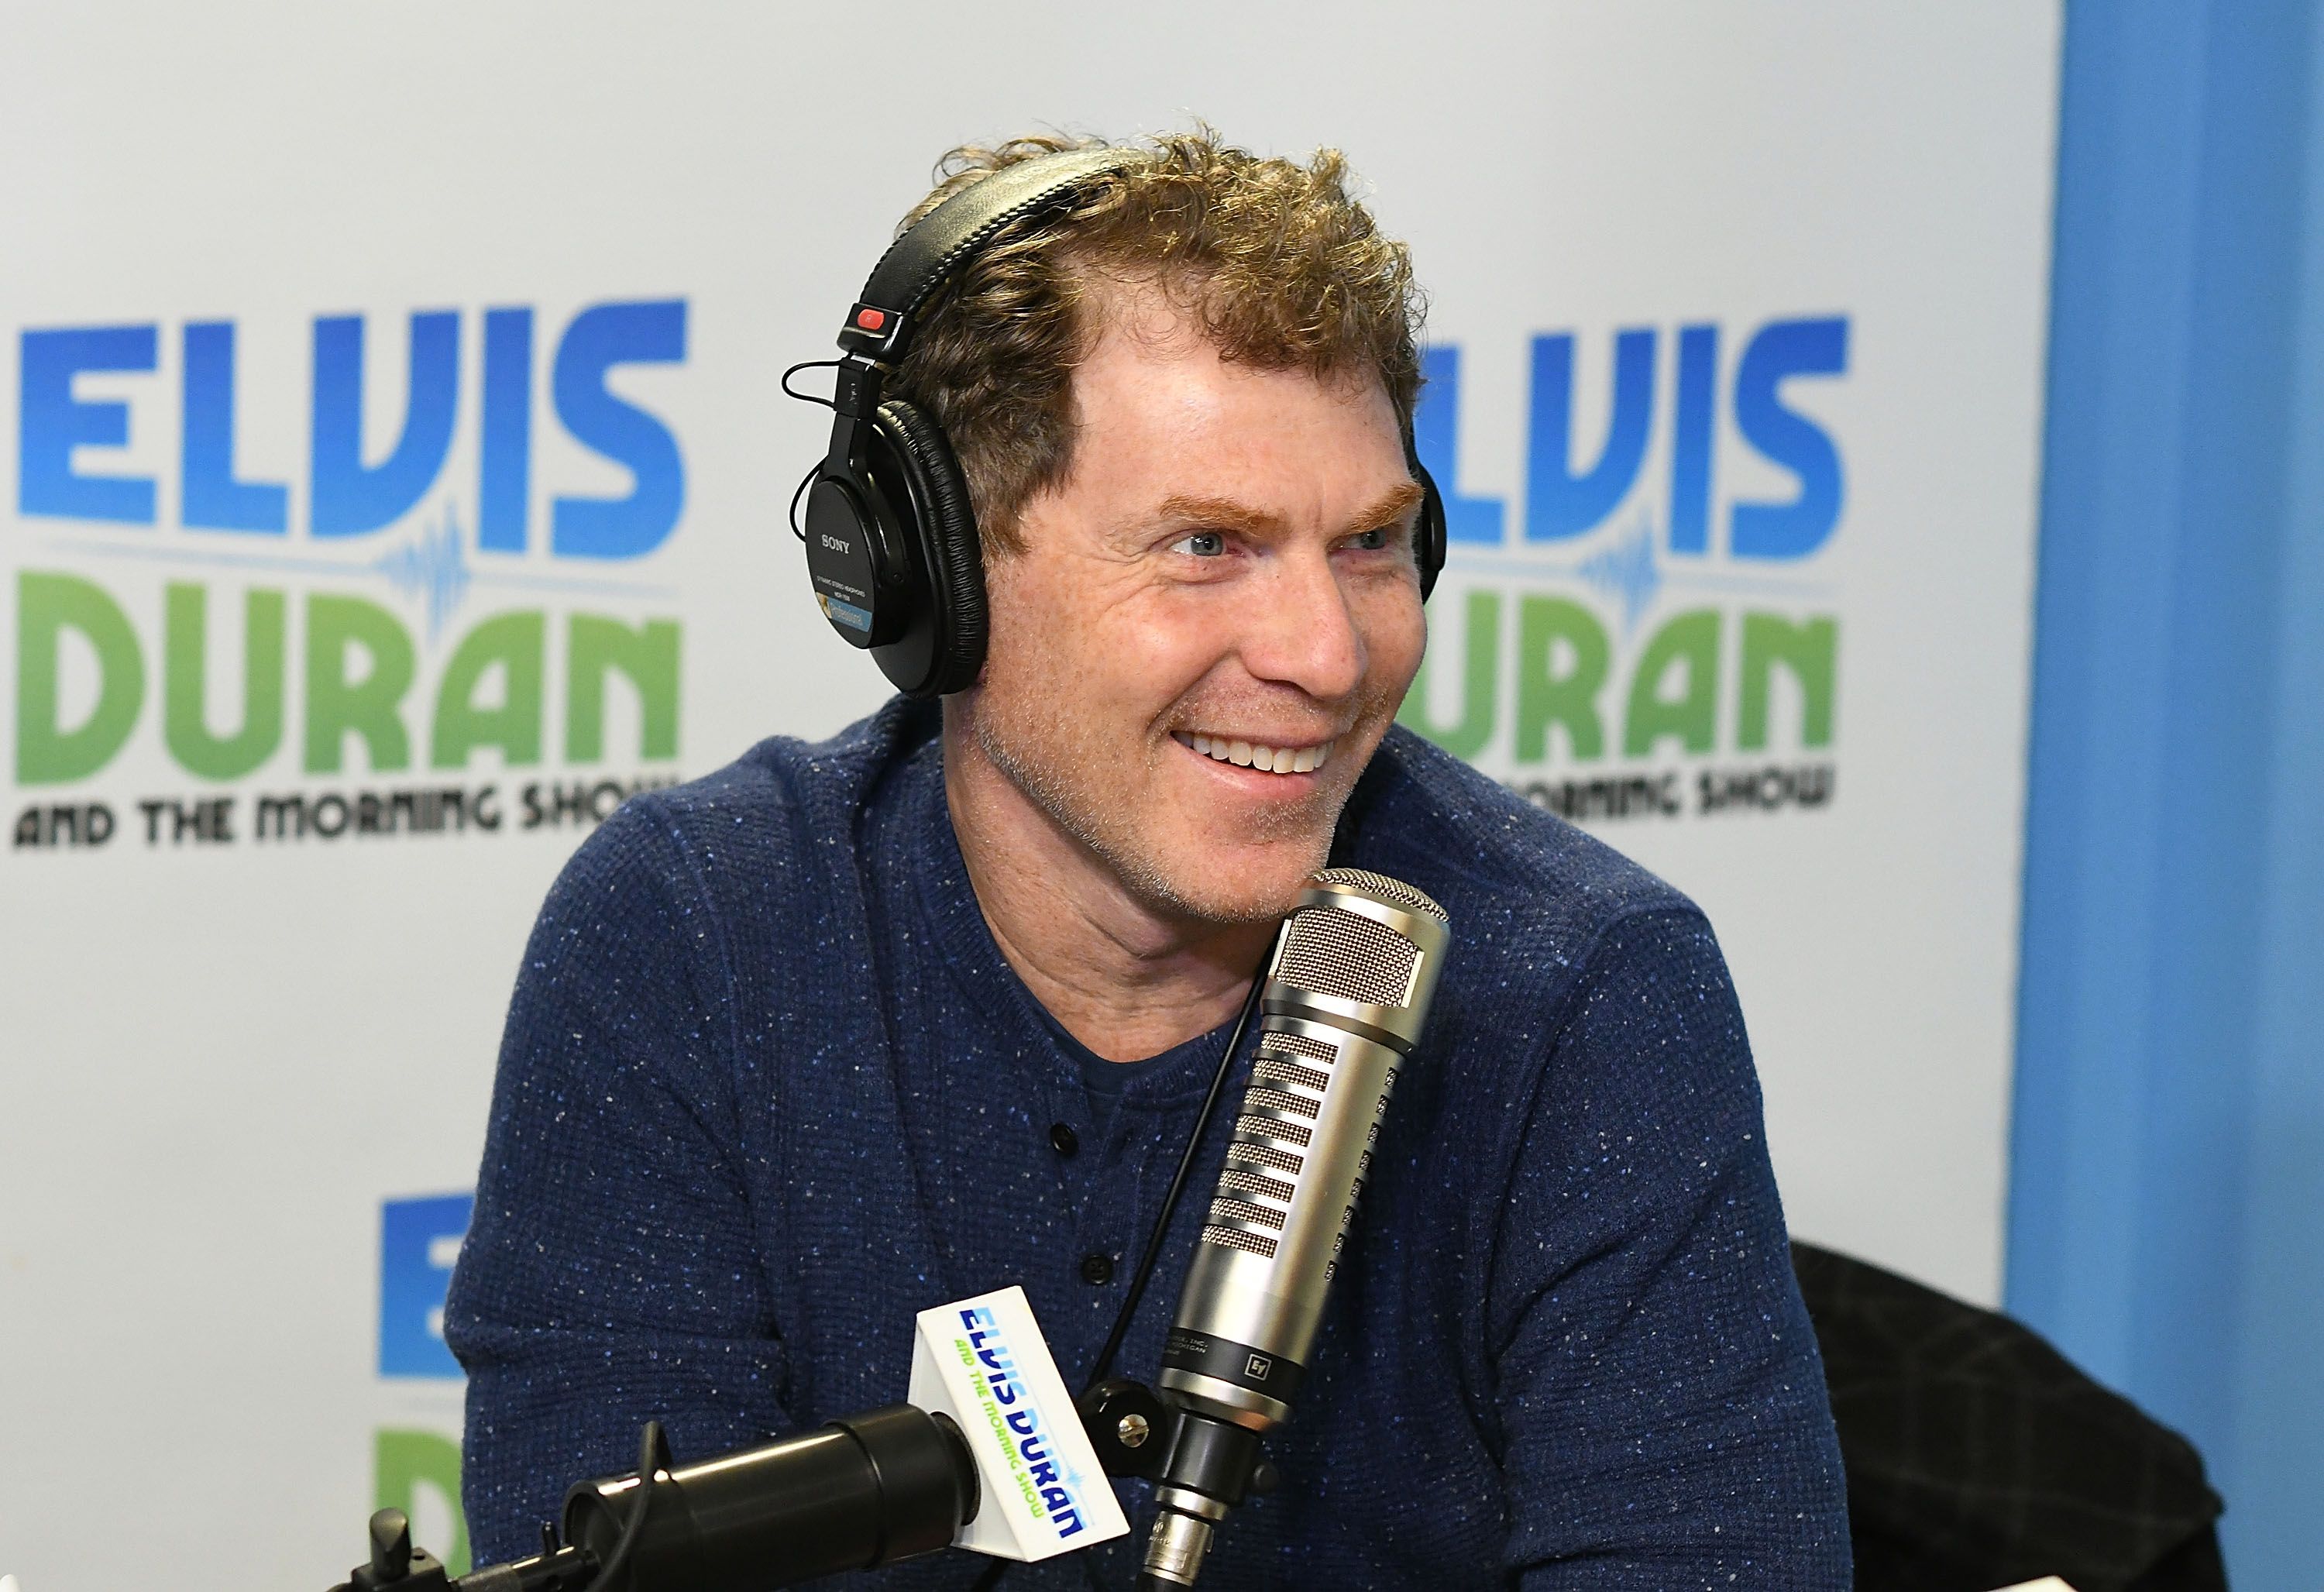  Bobby Flay on "The Elvis Duran Z100 Morning Show" in 2017 in New York City | Source: Getty Images